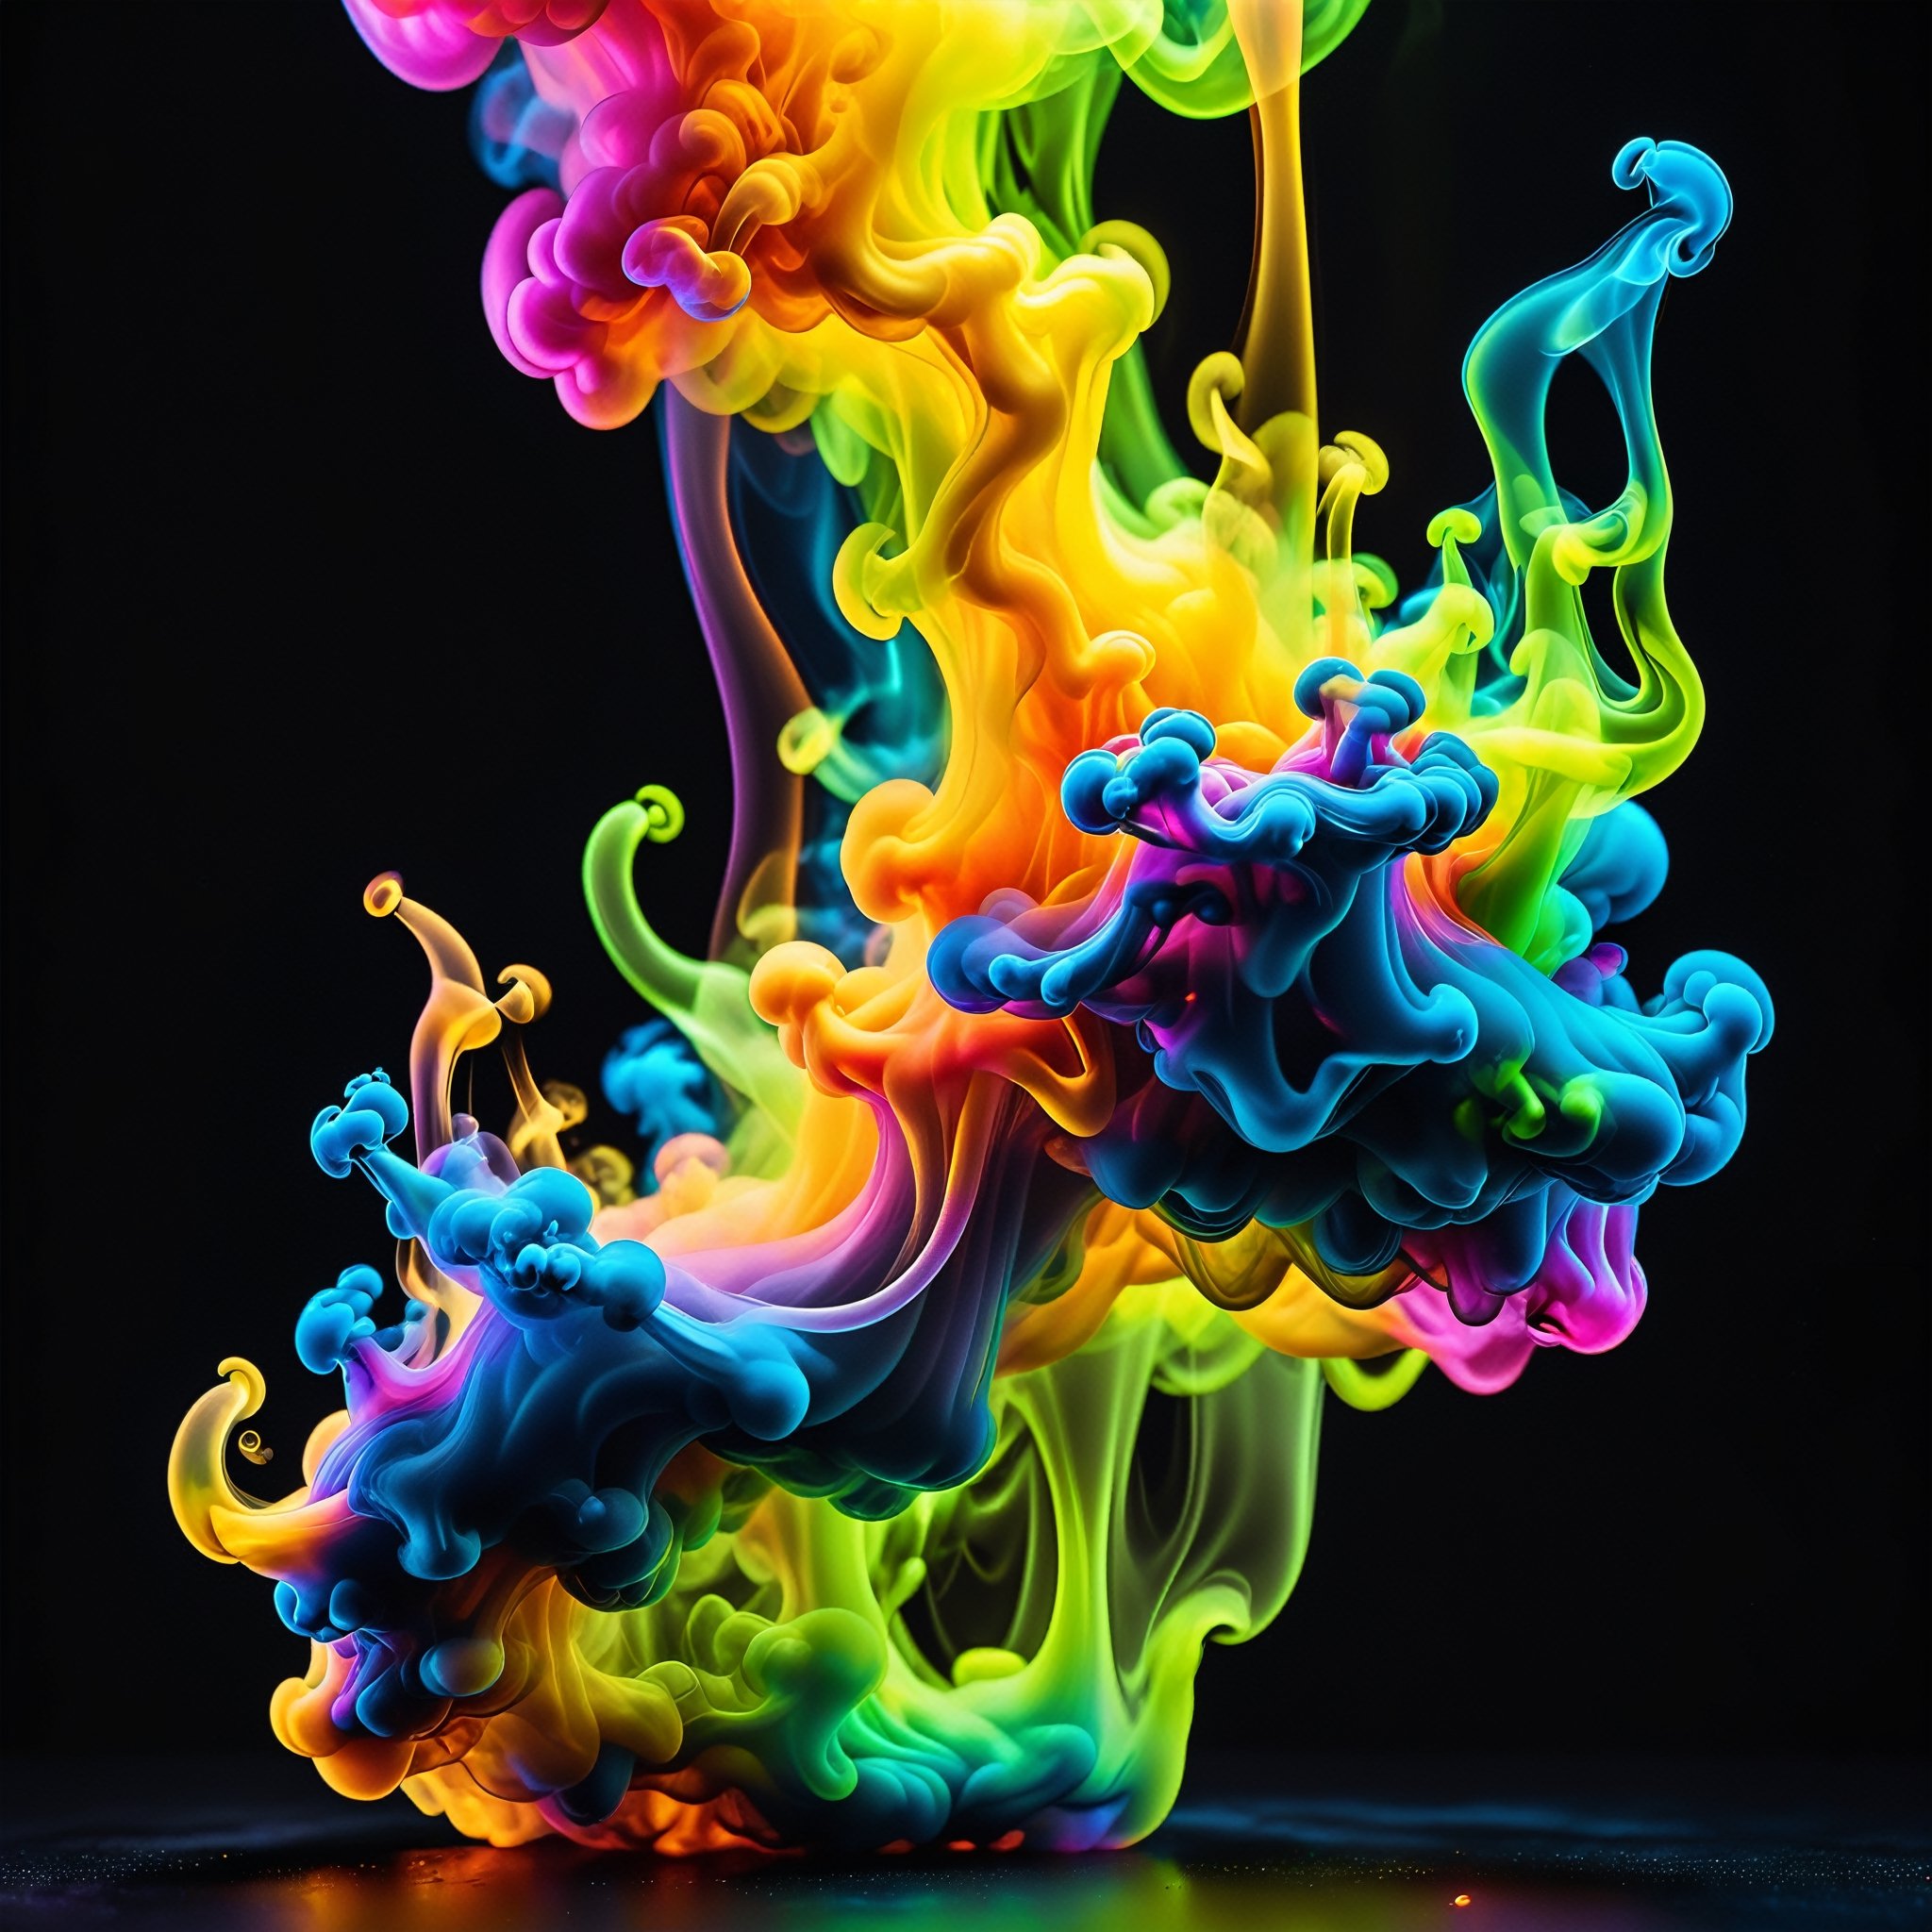 Liquid and Smoke, Dark Backdrop, Wallpaper. ral-barriertapetranslucent, Macro photo of neon glowing organic shaped liquid smoke. Technology backdrop, extremely detailed, are all the colours of the rainbow, with yellow being the most important one